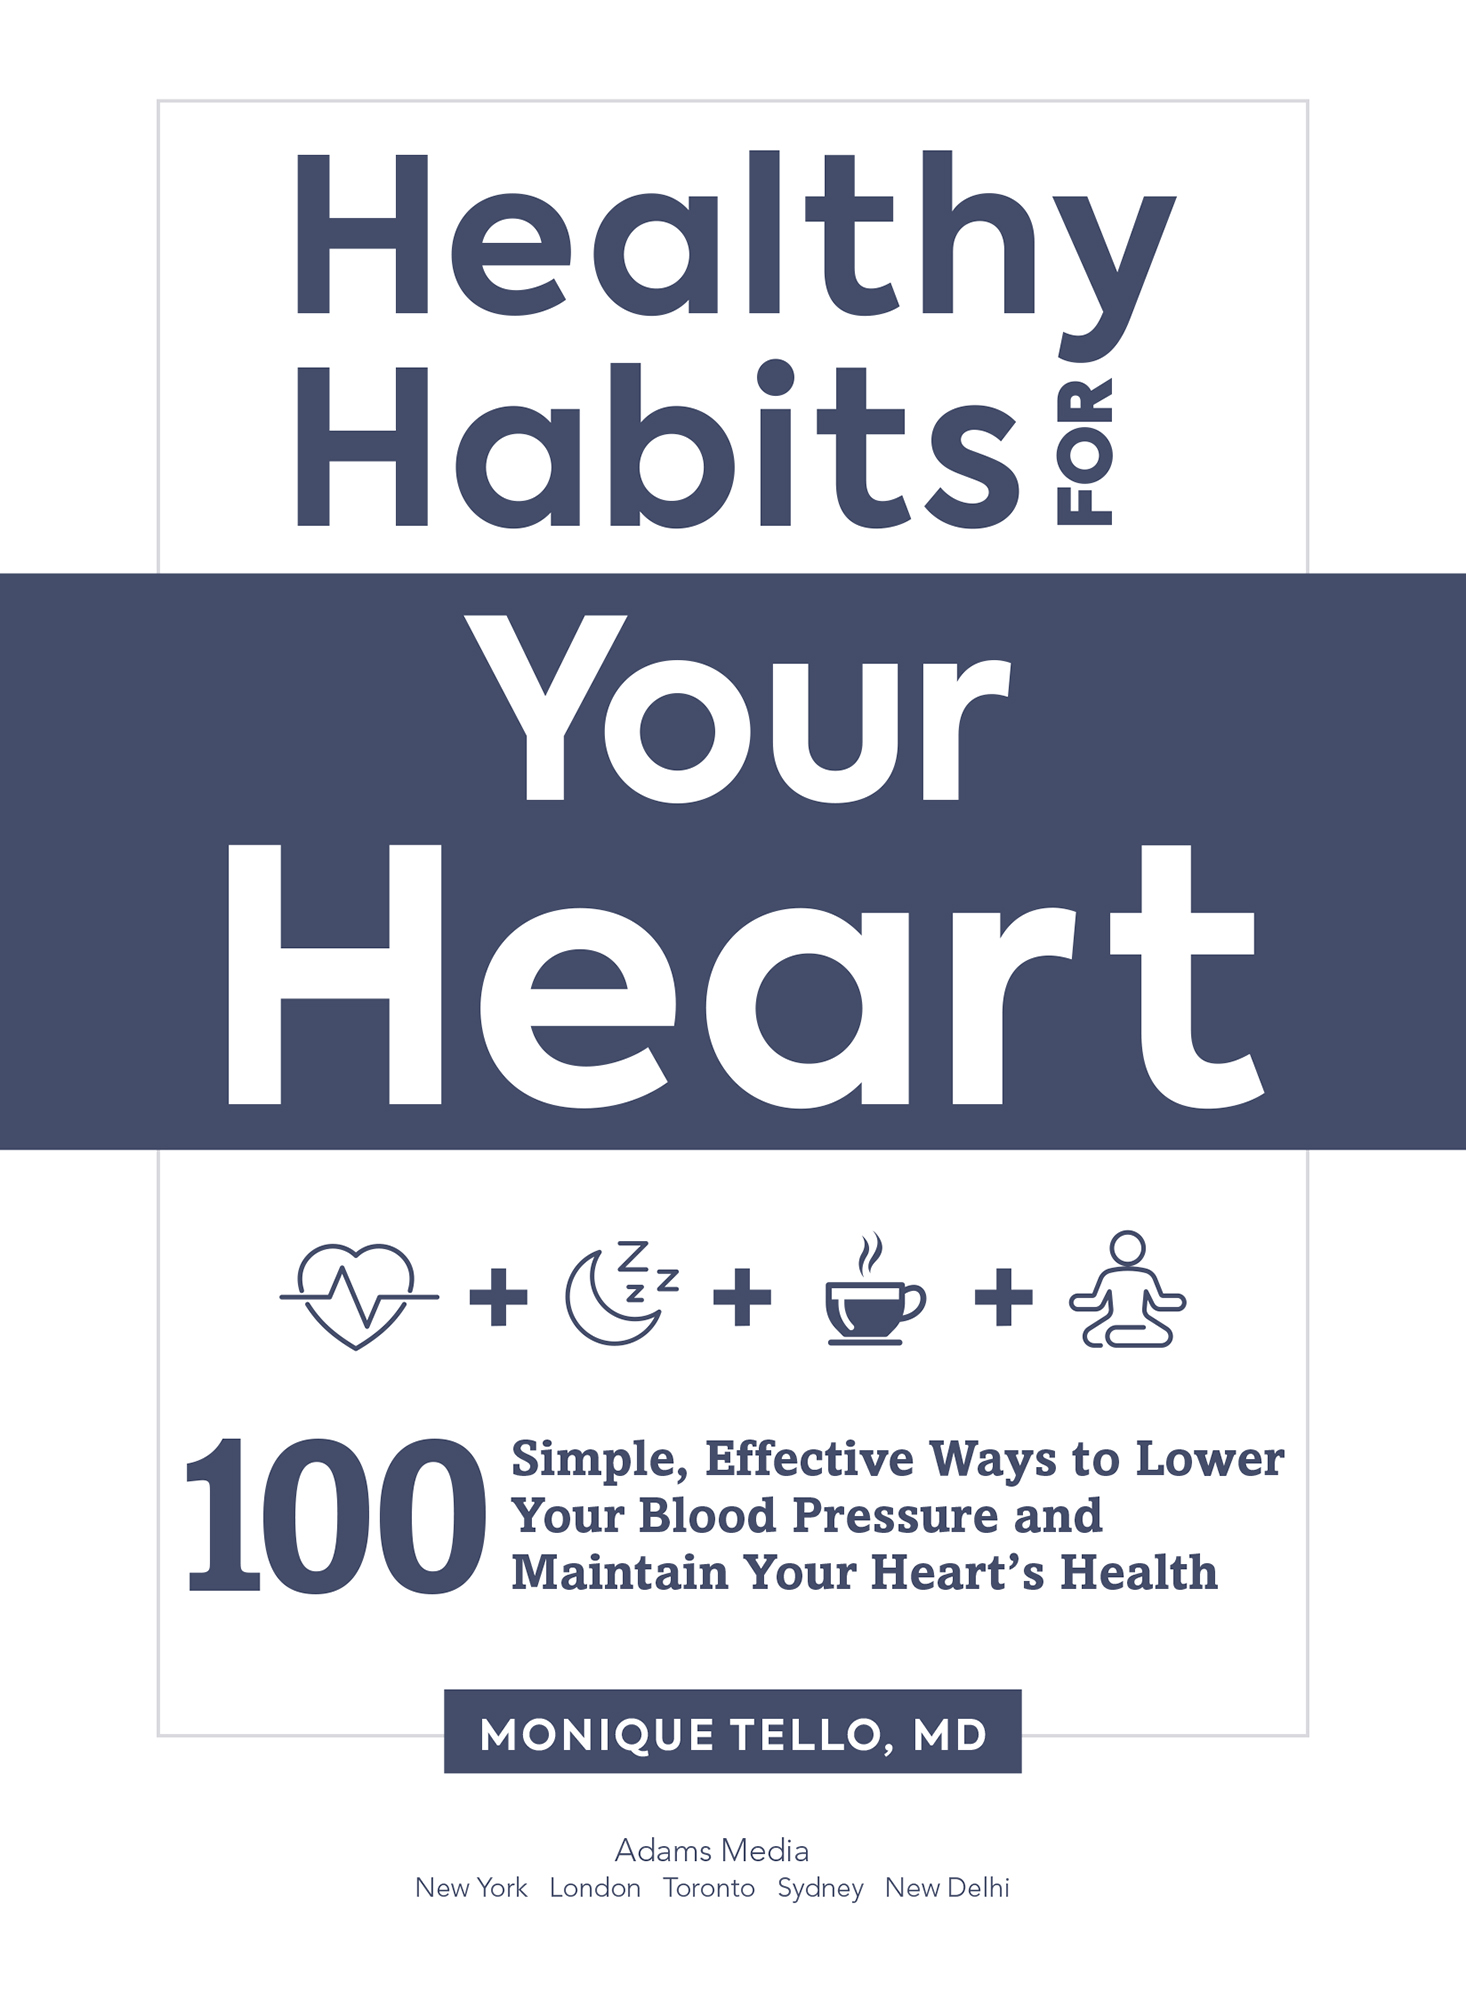 Healthy habits for your heart 100 simple effective ways to lower your blood pressure and maintain your hearts health - image 2